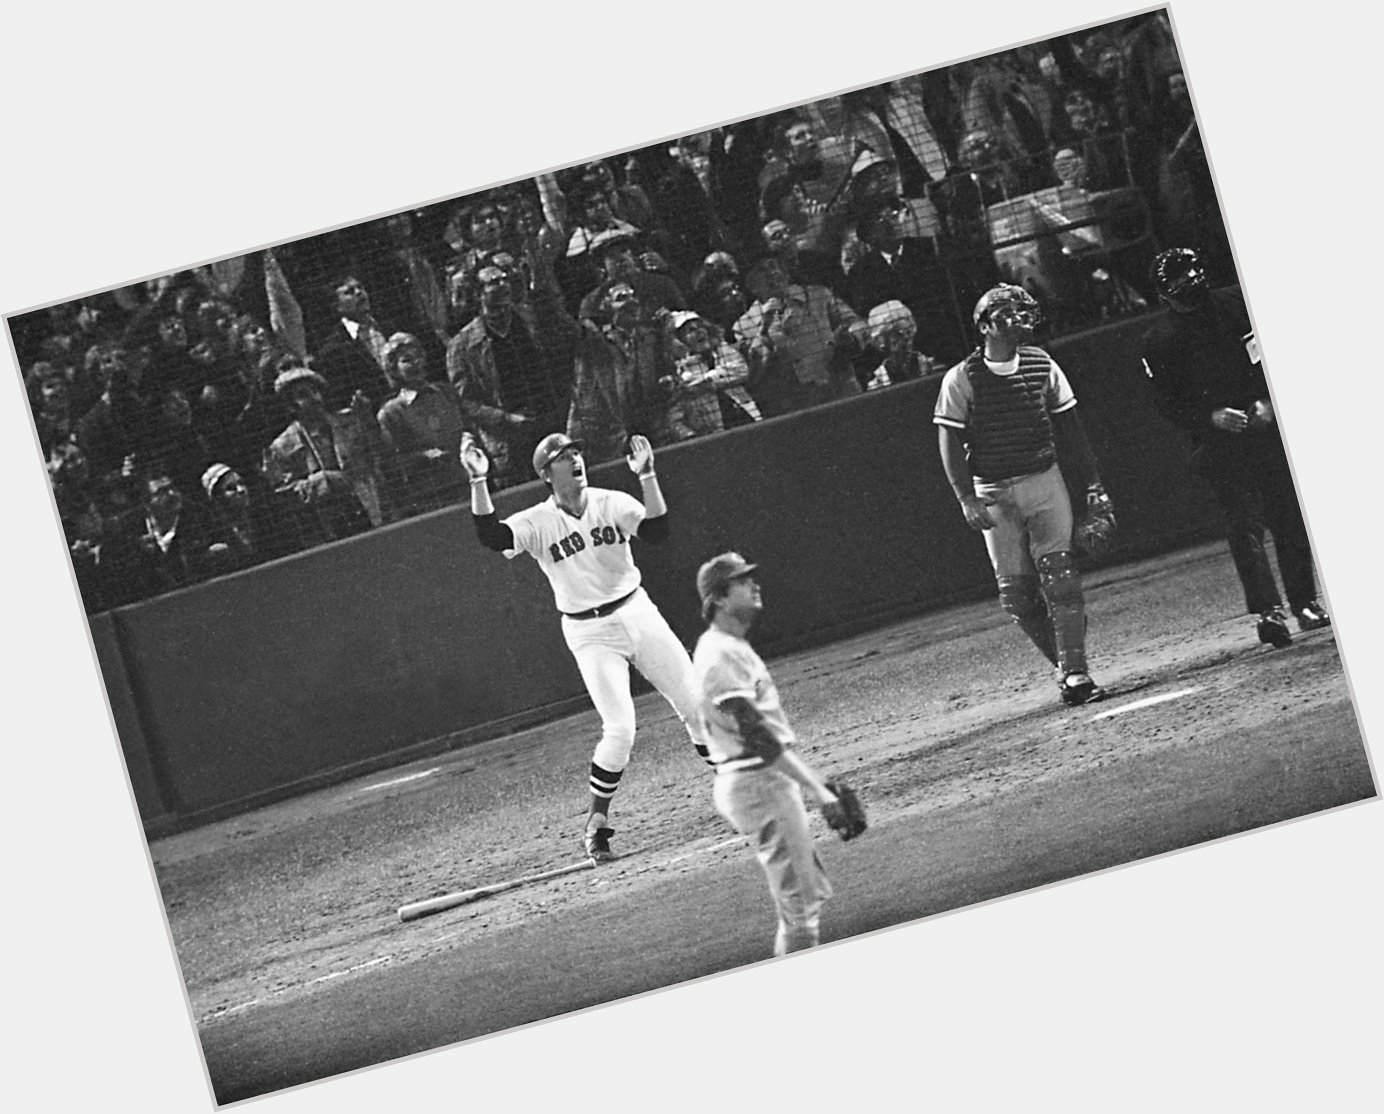 Happy 75 birthday to the great Carlton Fisk. 